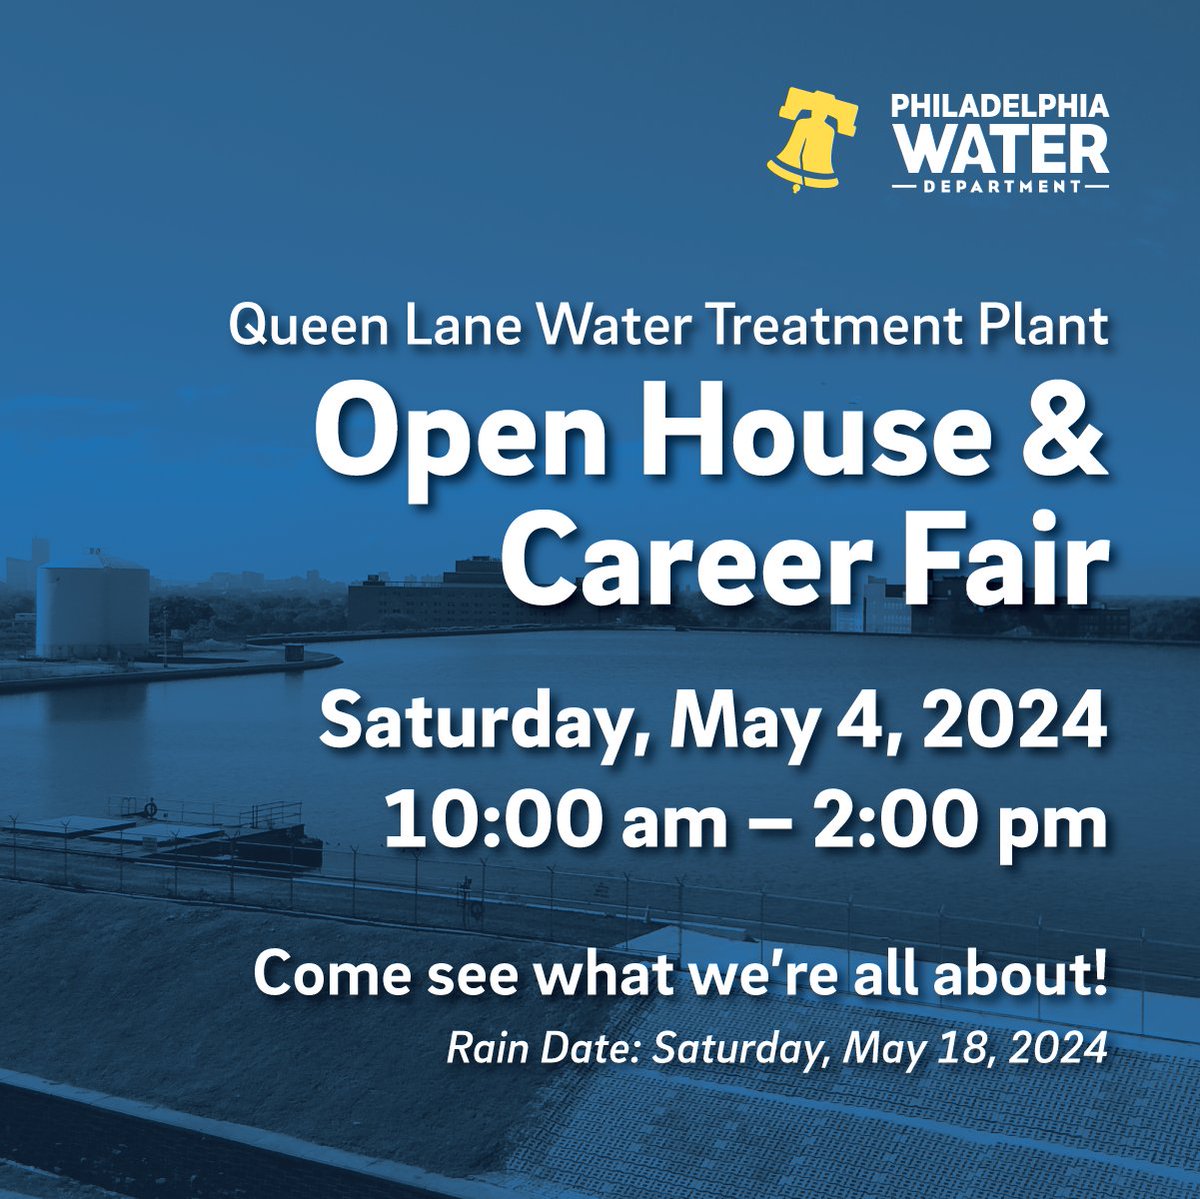 Career Fair Feature: PWD Apprenticeship Program Meet Dashon, who completed our Apprenticeship Program in 2023, and is now a Public Works Maintenance Trainee working at our Queen Lane Plant. Go Dashon! Ask us about Apprenticeships, Water Careers, and more this Saturday, May 4.